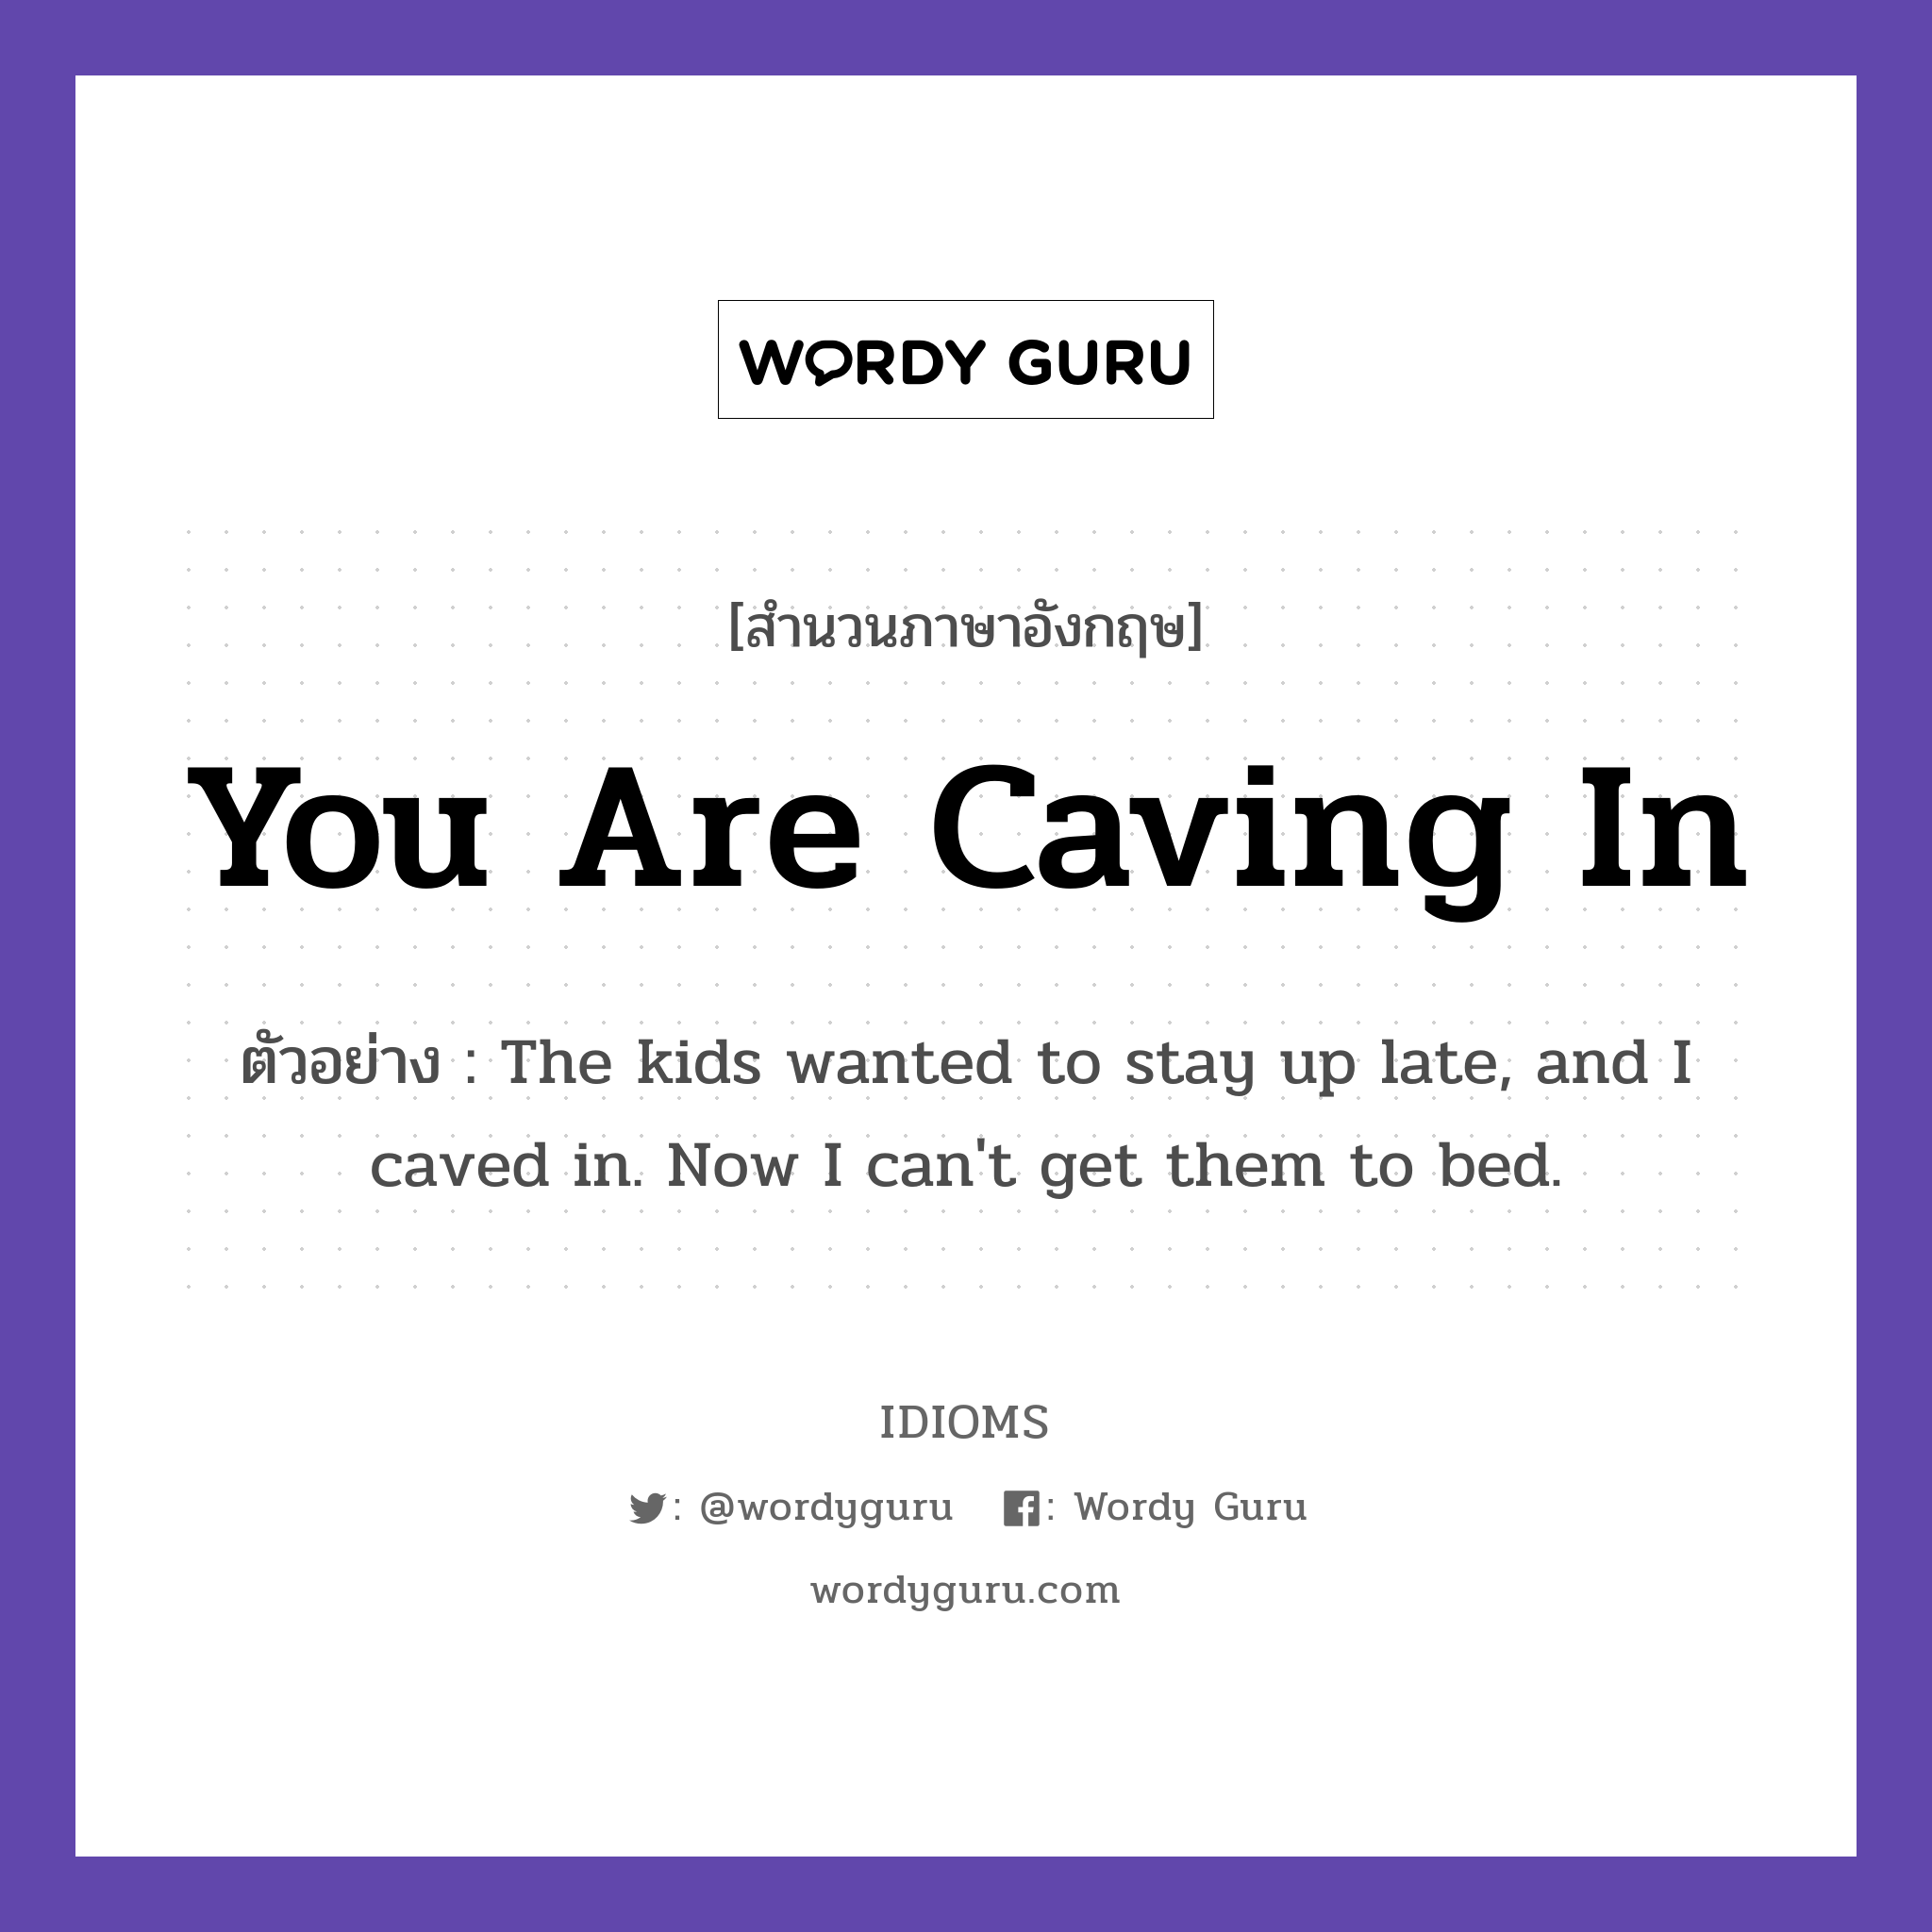 You Are Caving In แปลว่า?, สำนวนภาษาอังกฤษ You Are Caving In ตัวอย่าง The kids wanted to stay up late, and I caved in. Now I can't get them to bed.